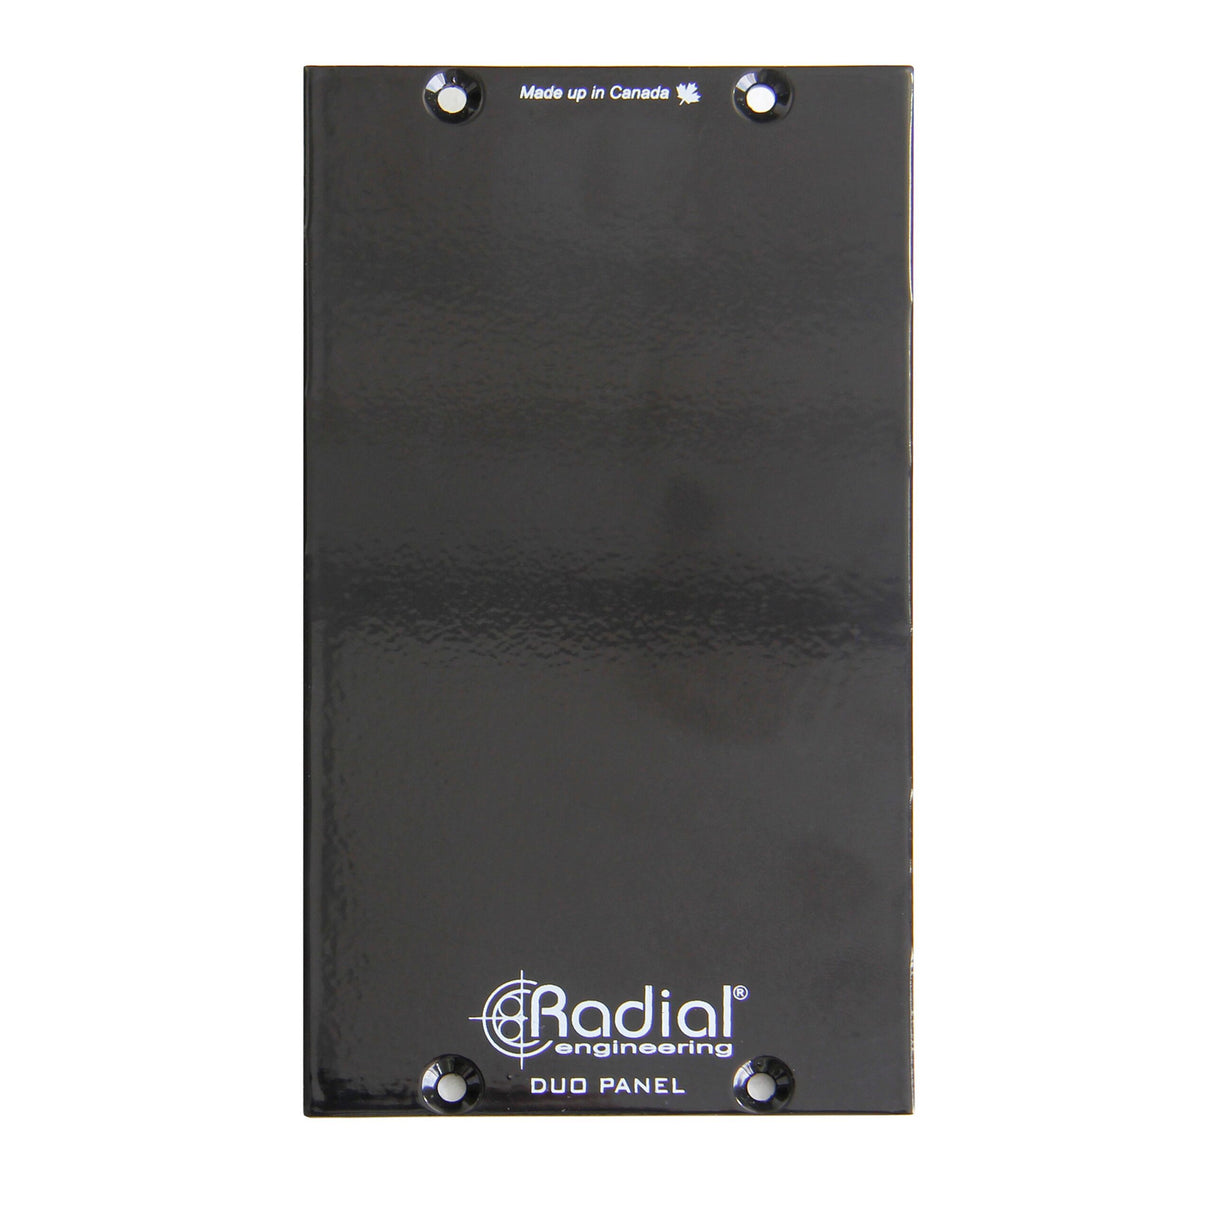 Radial Duo Blank Double Space Panel for 500 Series